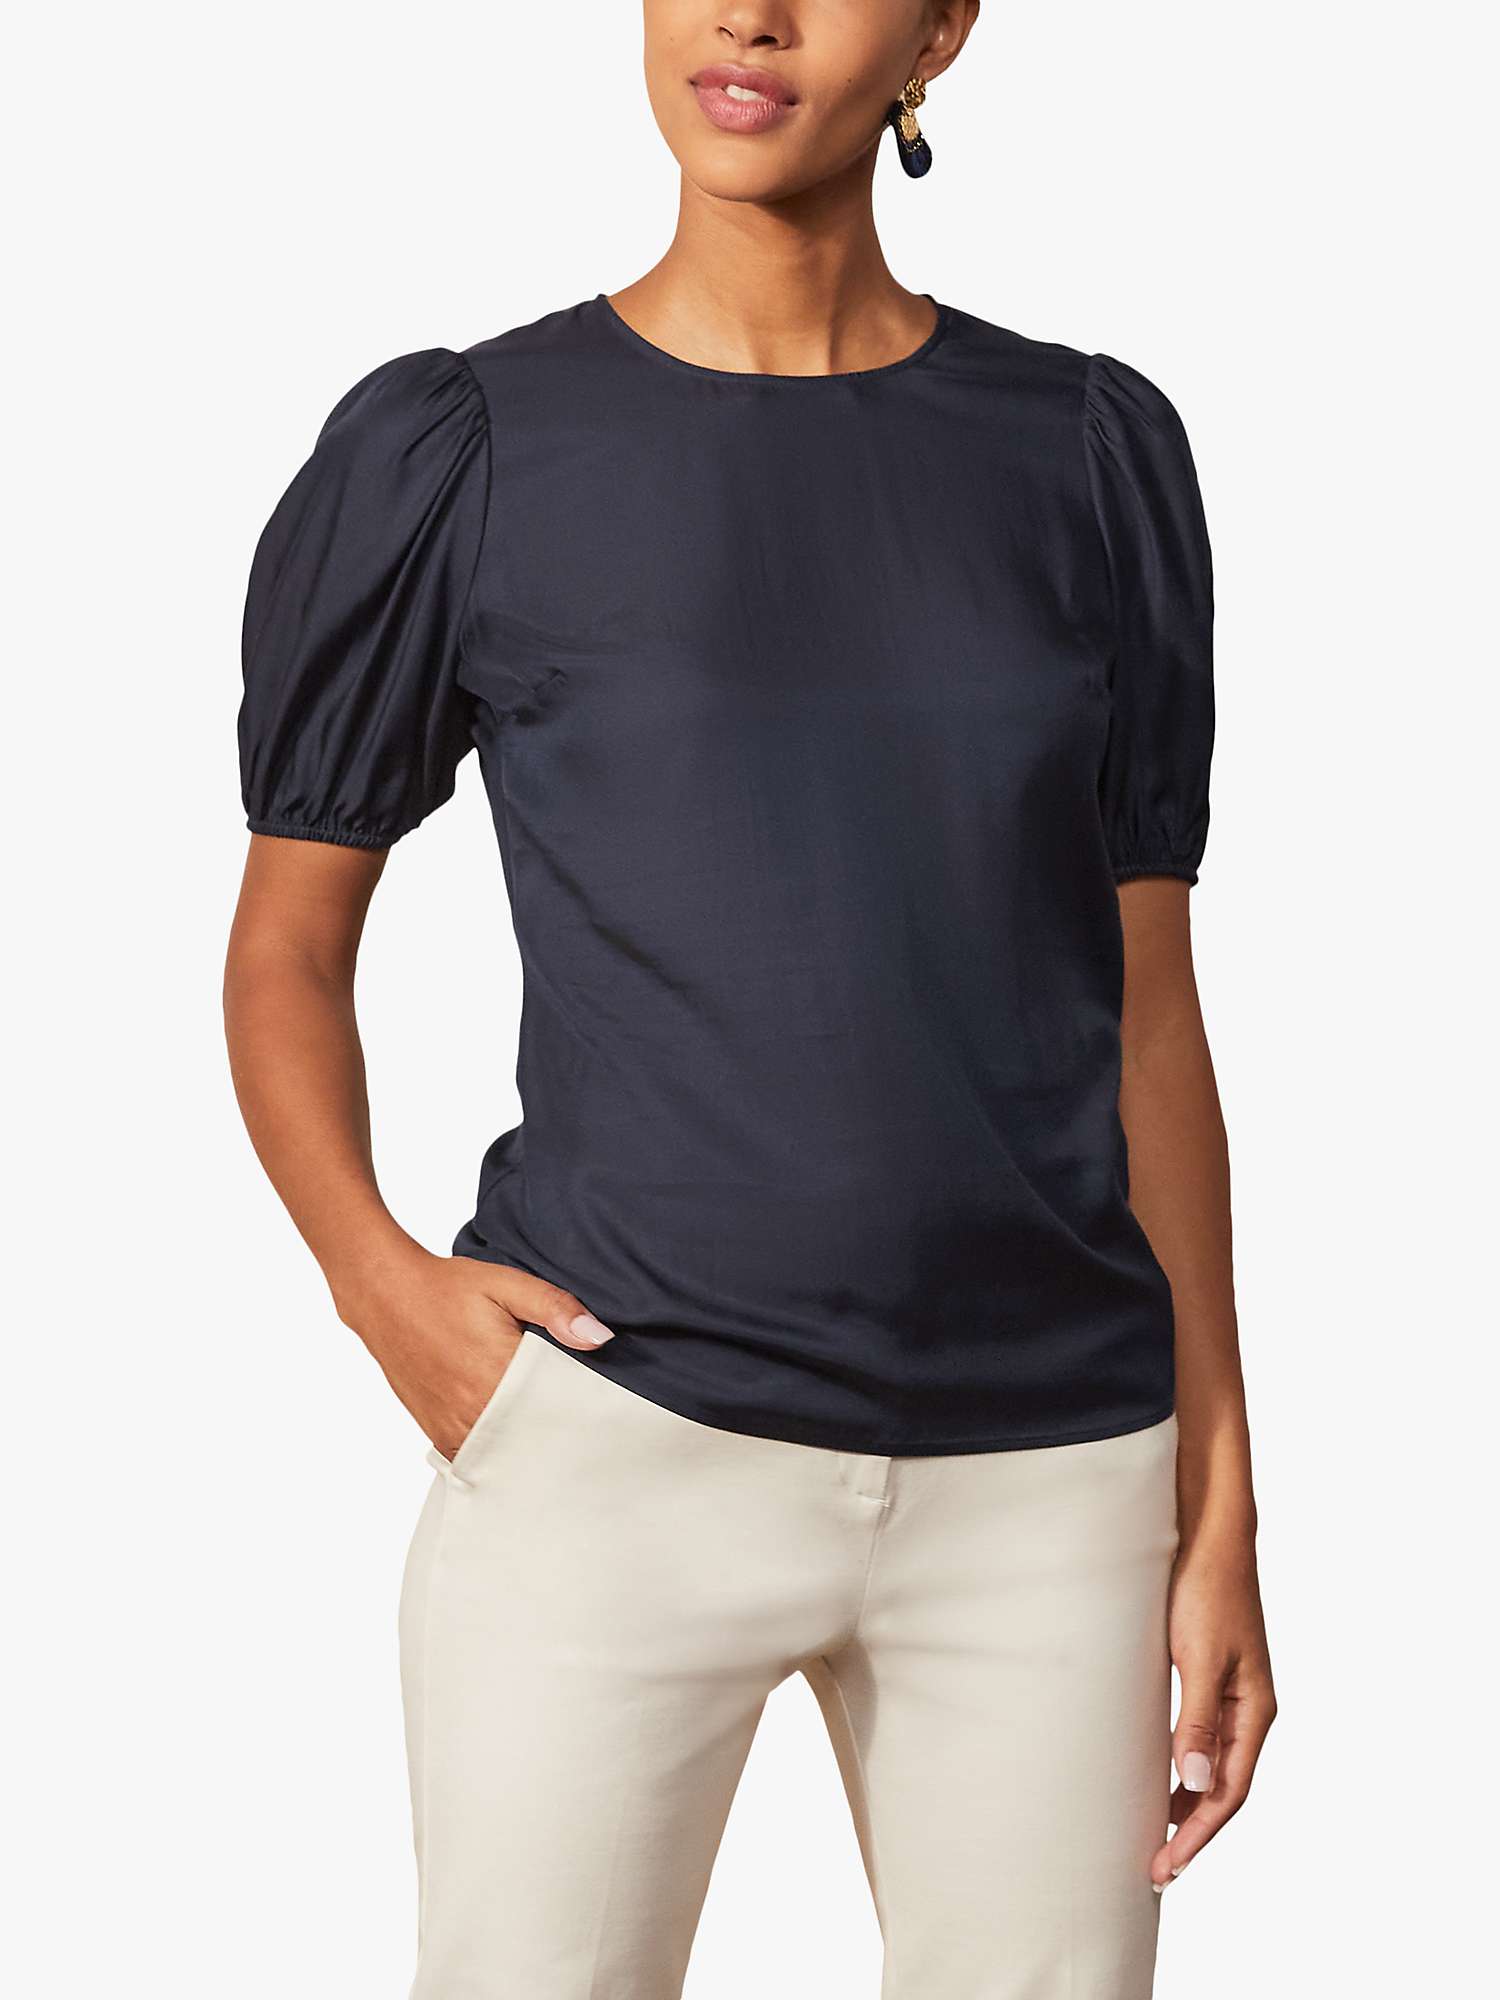 Buy Boden Adriana Puff Sleeve Top Online at johnlewis.com